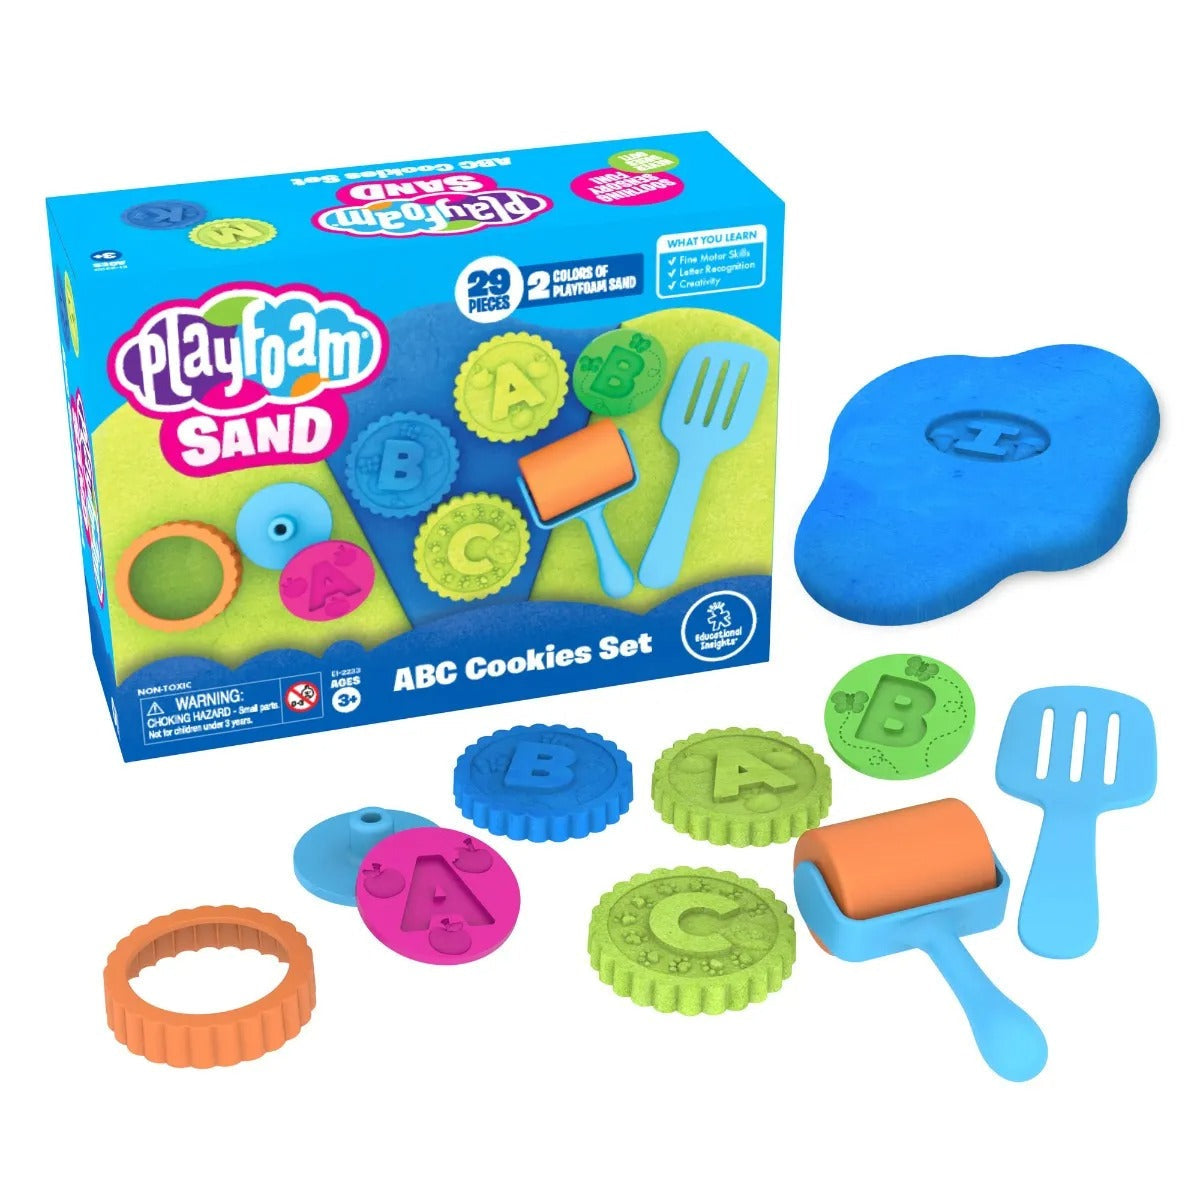 Playfoam® Sand Abc Cookies Set, Roll, stamp, and serve your way to learning the alphabet with Playfoam Sand ABC Cookies. This tactile cookie play set includes a cookie cutter, handy roller, spatula, and 26 letter stamps, each with an image of an object that begins with that letter sound. As children squash and shape their Playfoam Sand they build alphabet recognition skills. Soft, colourful Playfoam Sand behaves like modelling clay and holds its shape when children mould and shape it and feels like dry sand